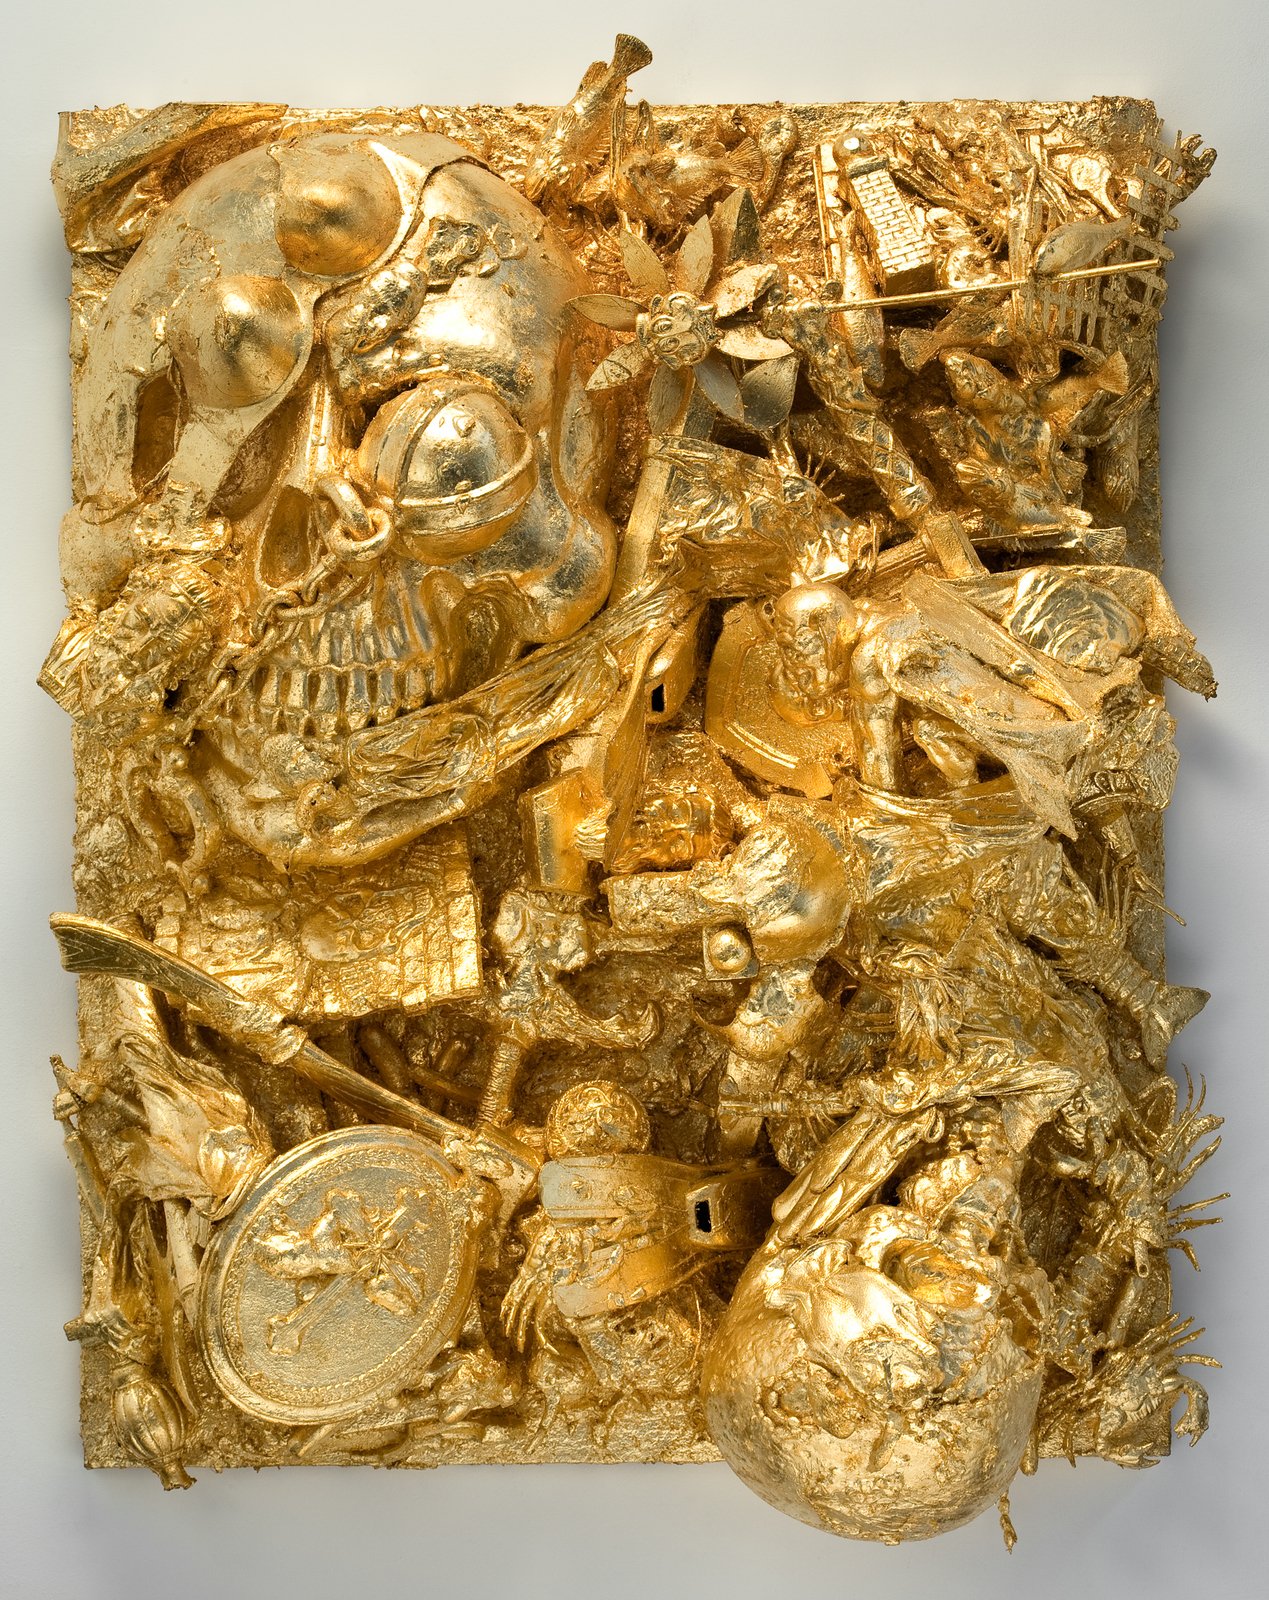 John Miller, Port Charles, Imitation Gold Leaf on Assorted Objects, Plaster, Cloth, and Styrofoam on a Hollow-core Panel. &copy; Courtesy Artist and Patrick Painter Inc.Los Angeles, USA.